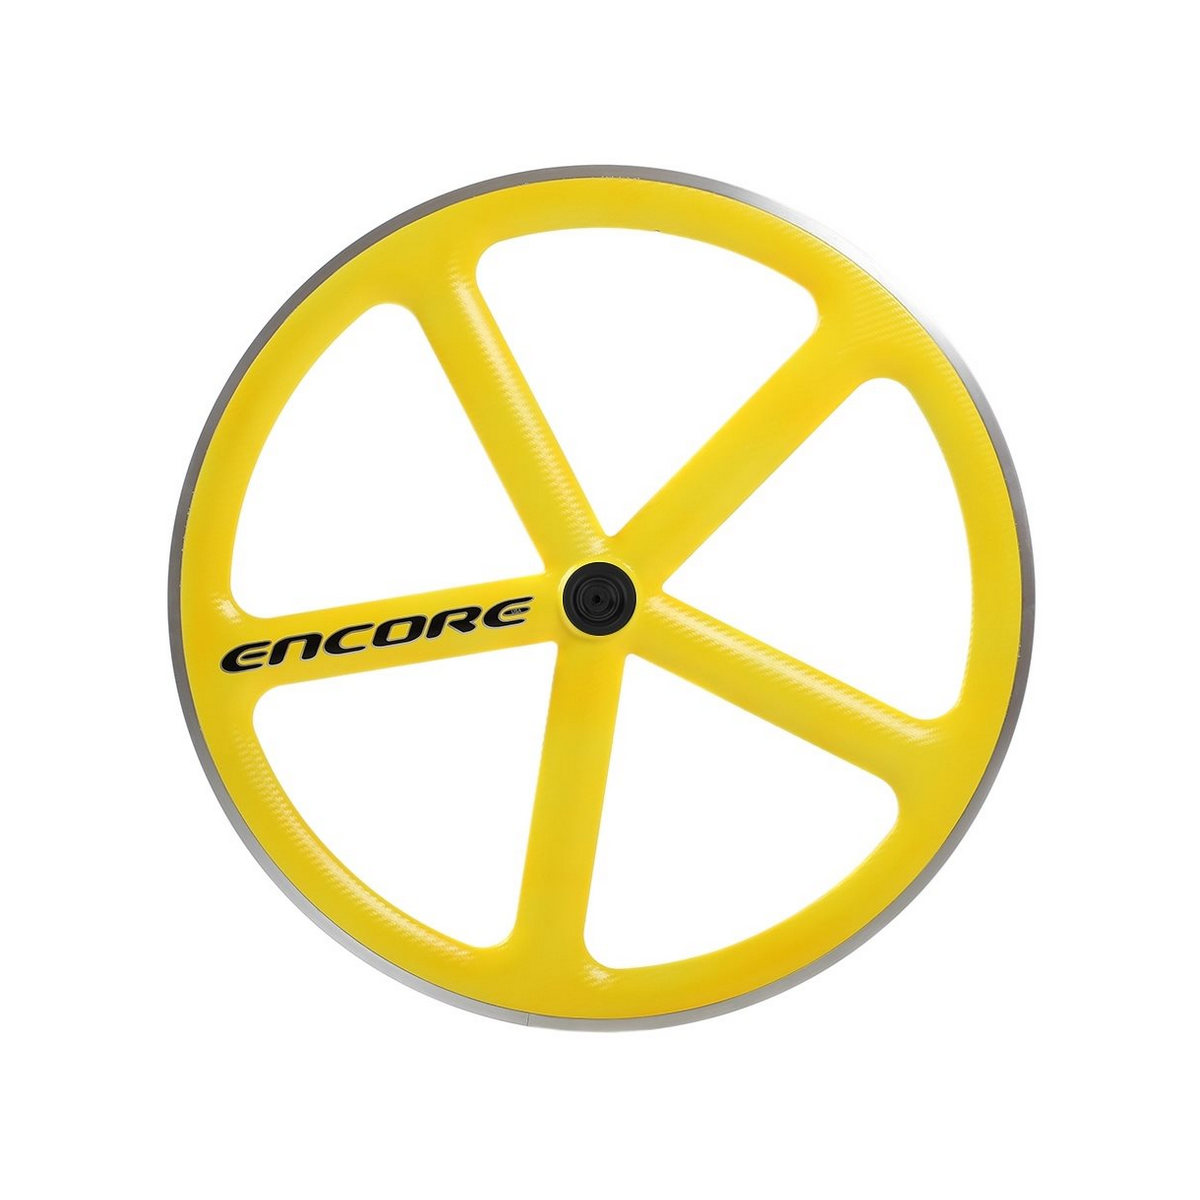 roue arrière 700c track 5 rayons carbone tissage jaune fluo msw